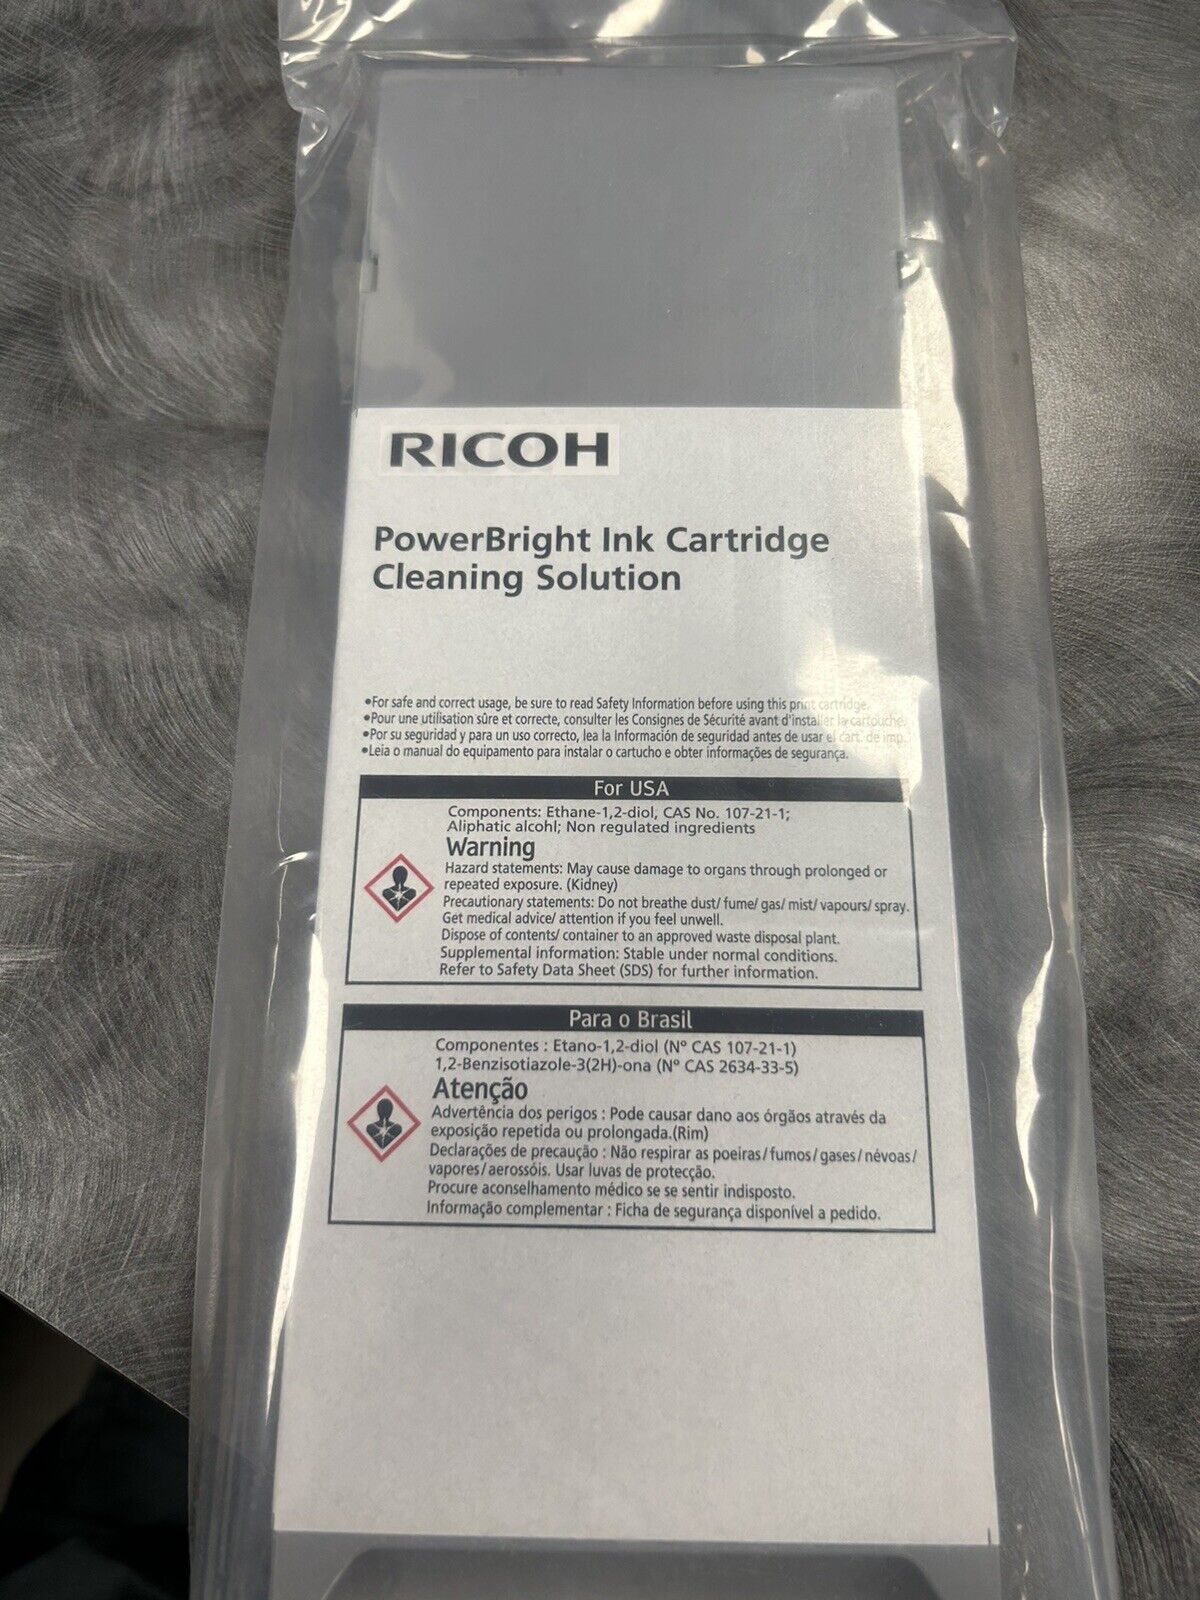 Ricoh RI 6000 Powerbright Ink Cartridge Cleaning Solution. Qty 10